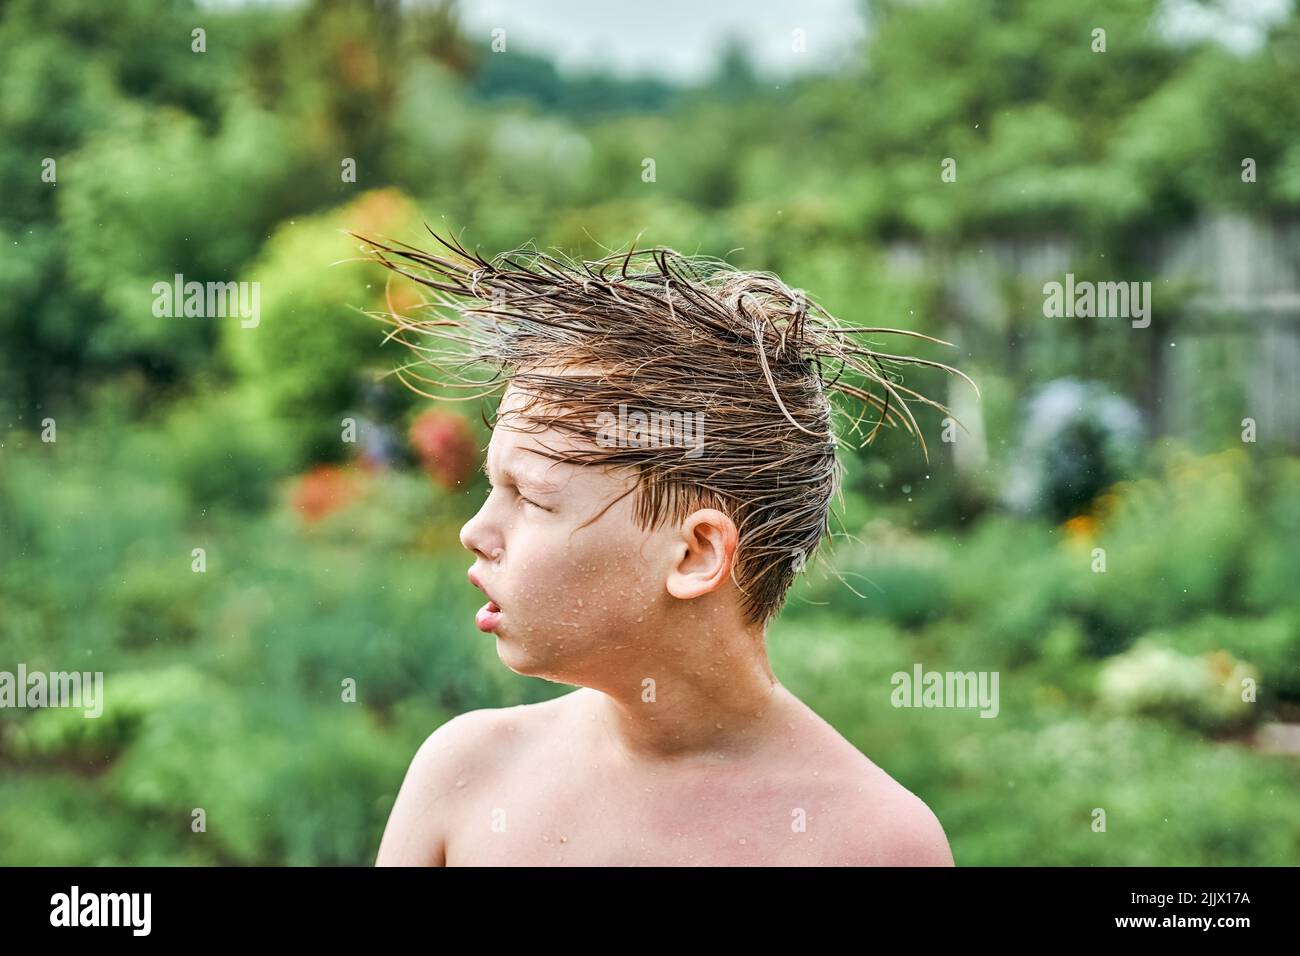 Cute blond boy twists wet head in different directions on blurred background. Schoolboy with funny facial expression after swimming in pool closeup Stock Photo